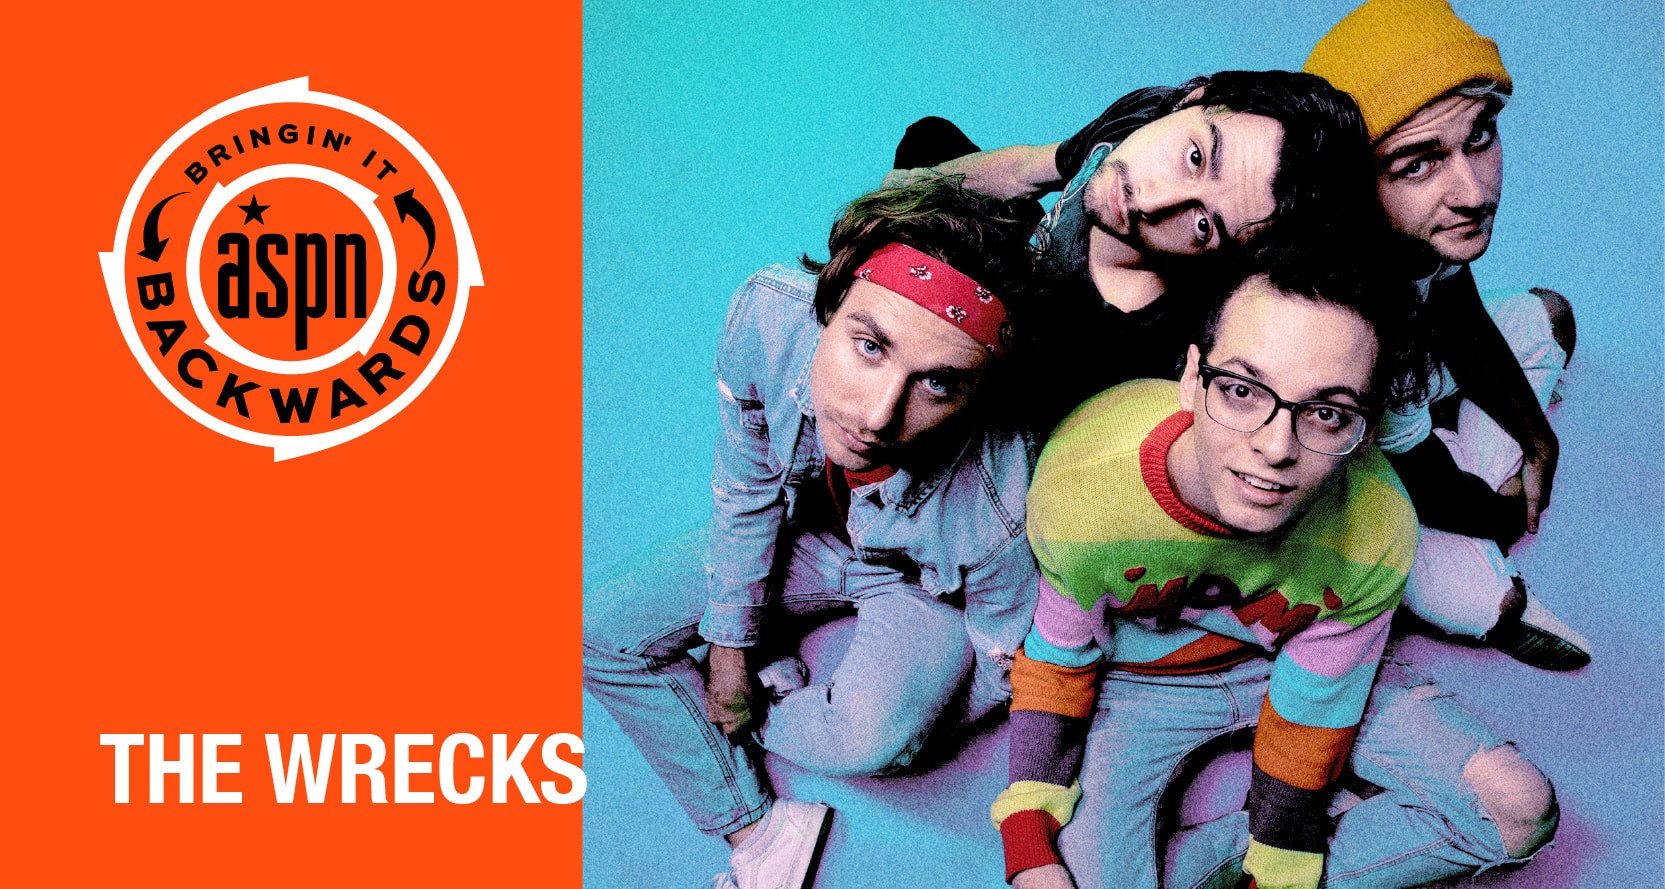 Bringin’ it Backwards: Interview with The Wrecks